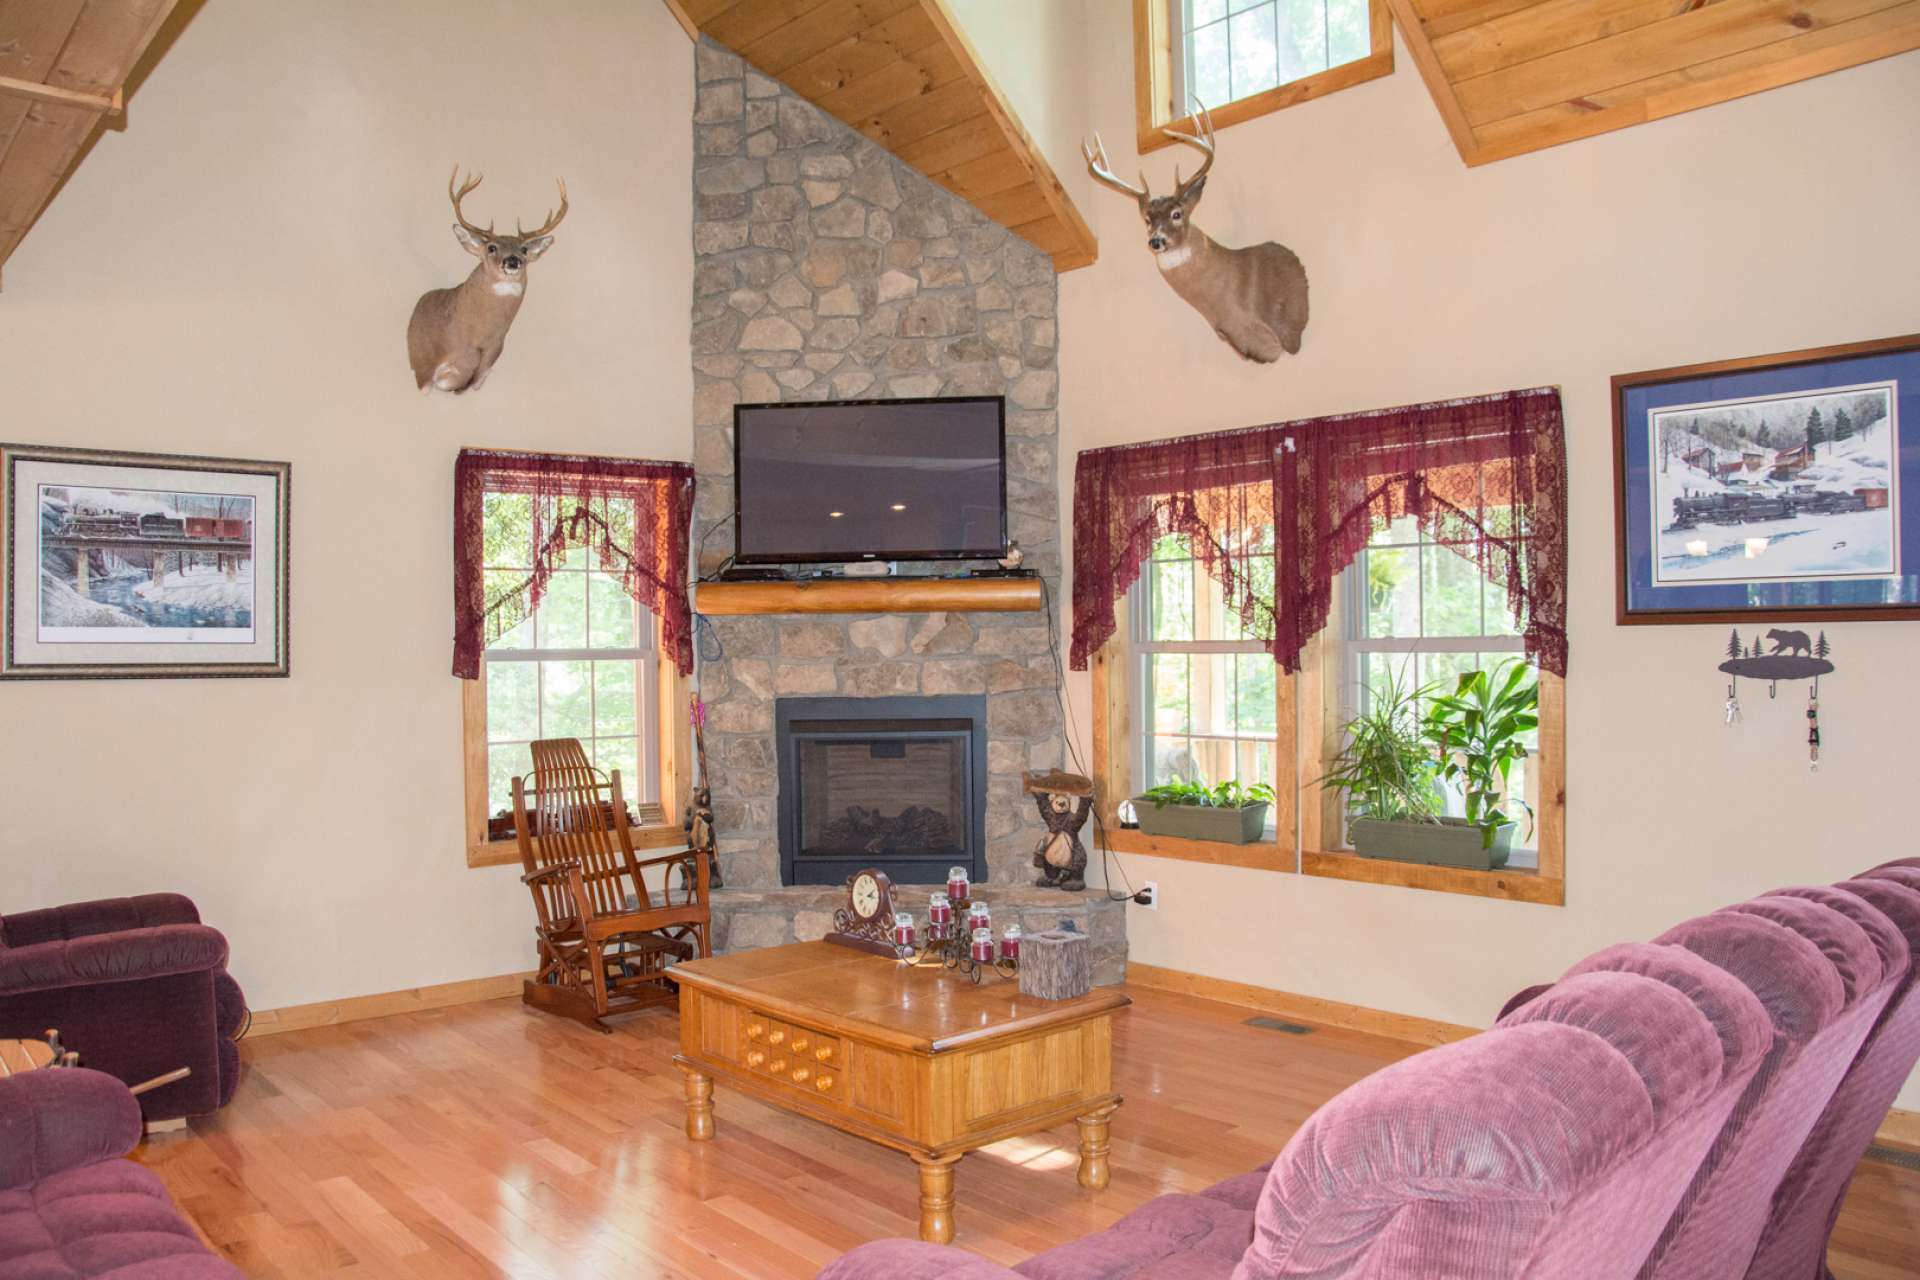 The cabin features an open great room boasting a stone fireplace with gas logs, vaulted ceiling, lots of windows filling the cabin with natural light, and wood floors radiating an inviting and warm ambiance as you enter the cabin.